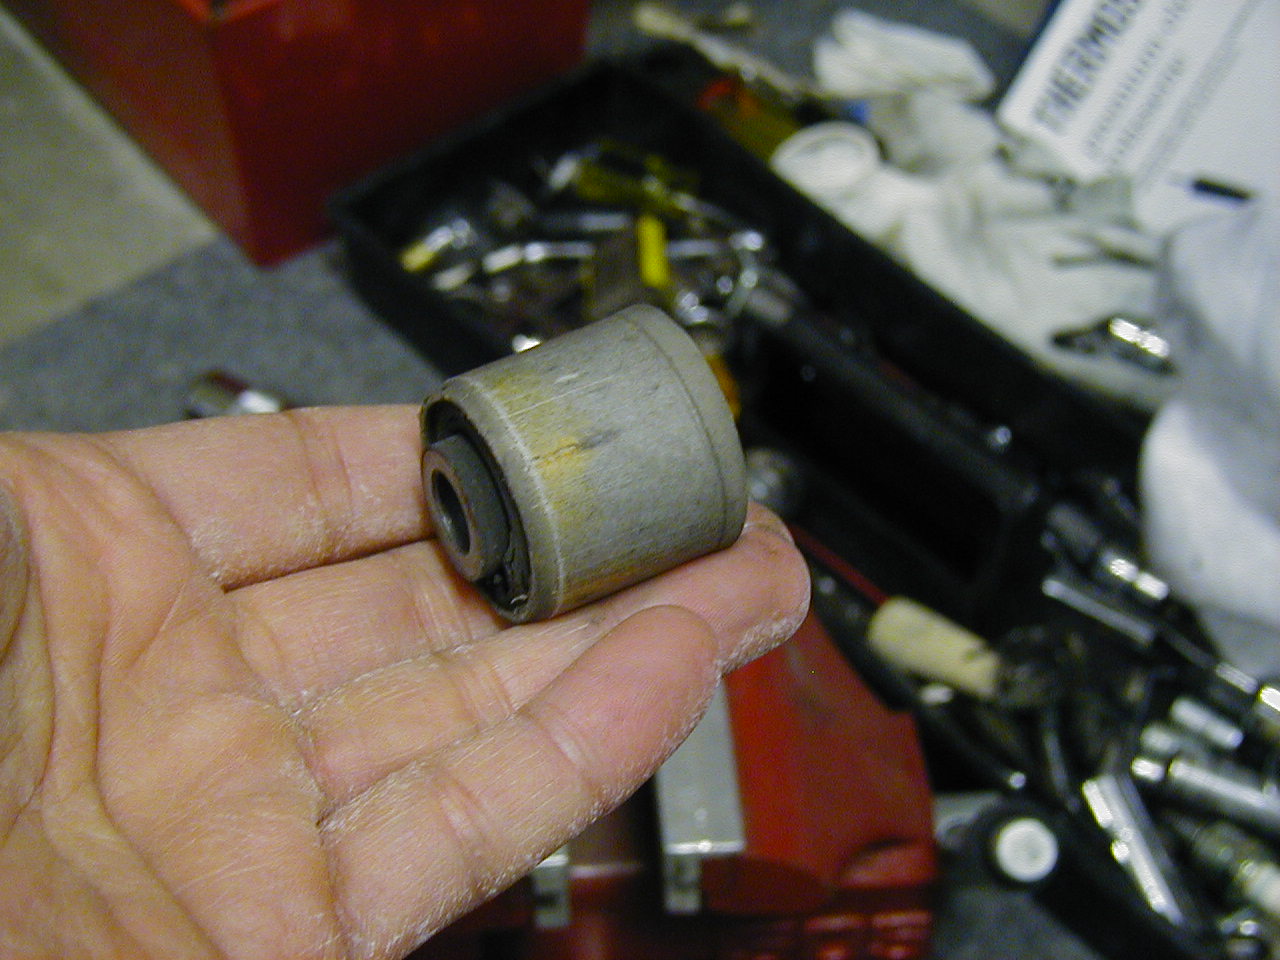 Here's a removed endlink bushing - note the one side has a camfered edge - this is the side you want to hammer it out from.